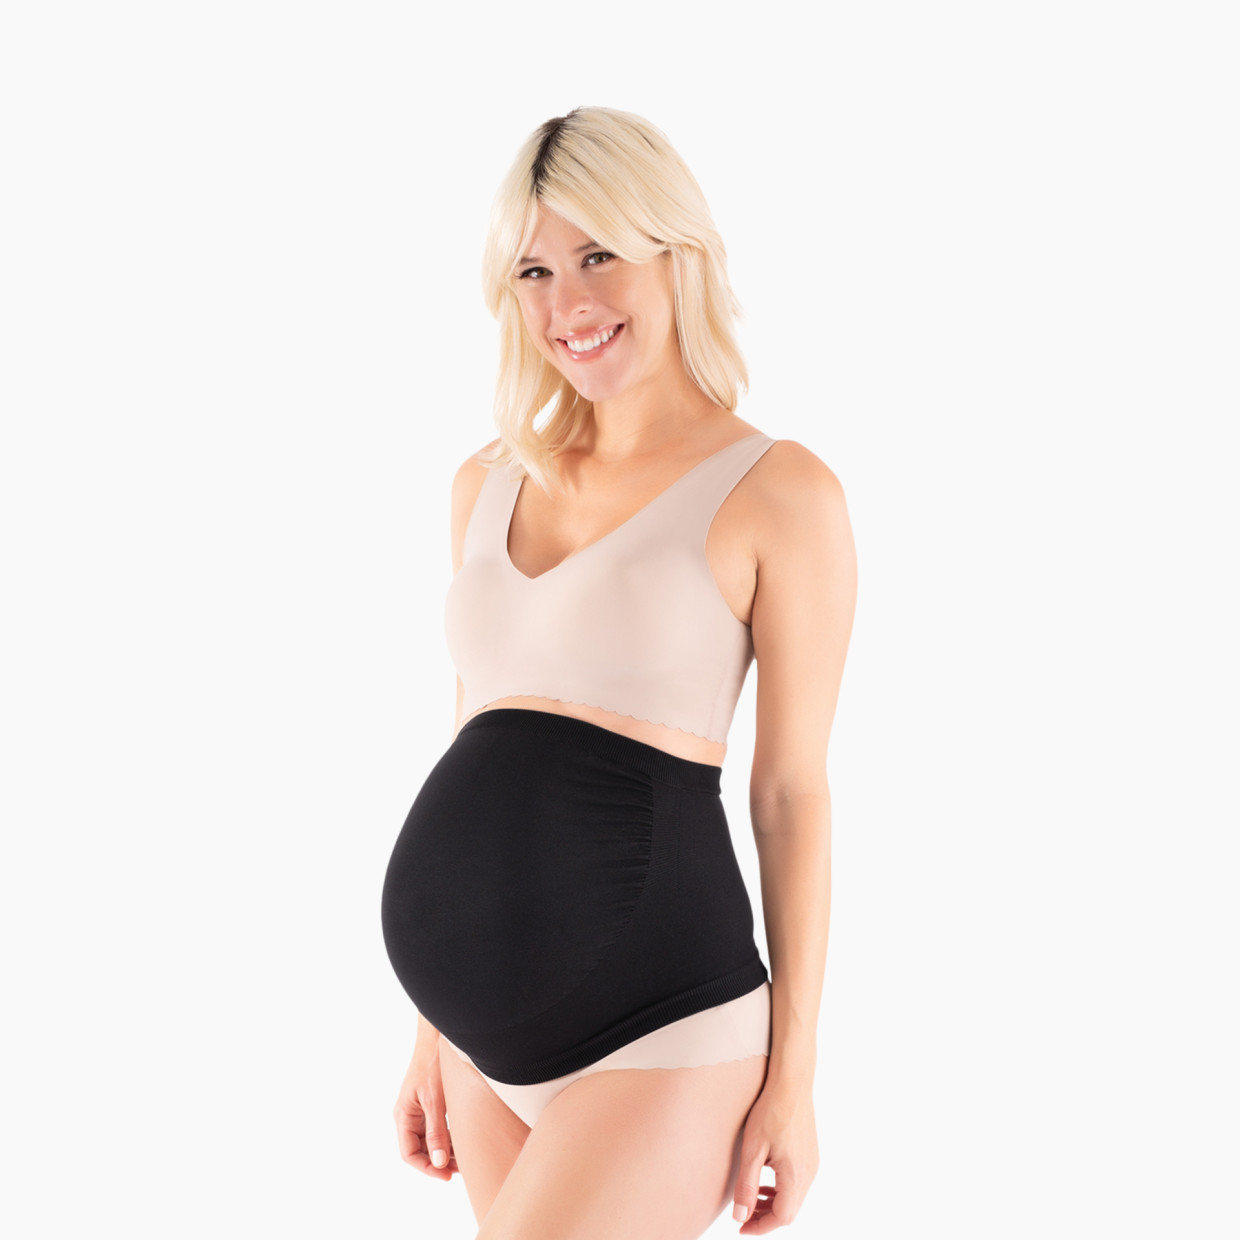 Belly Bandit Belly Boost - Black, X-Small.